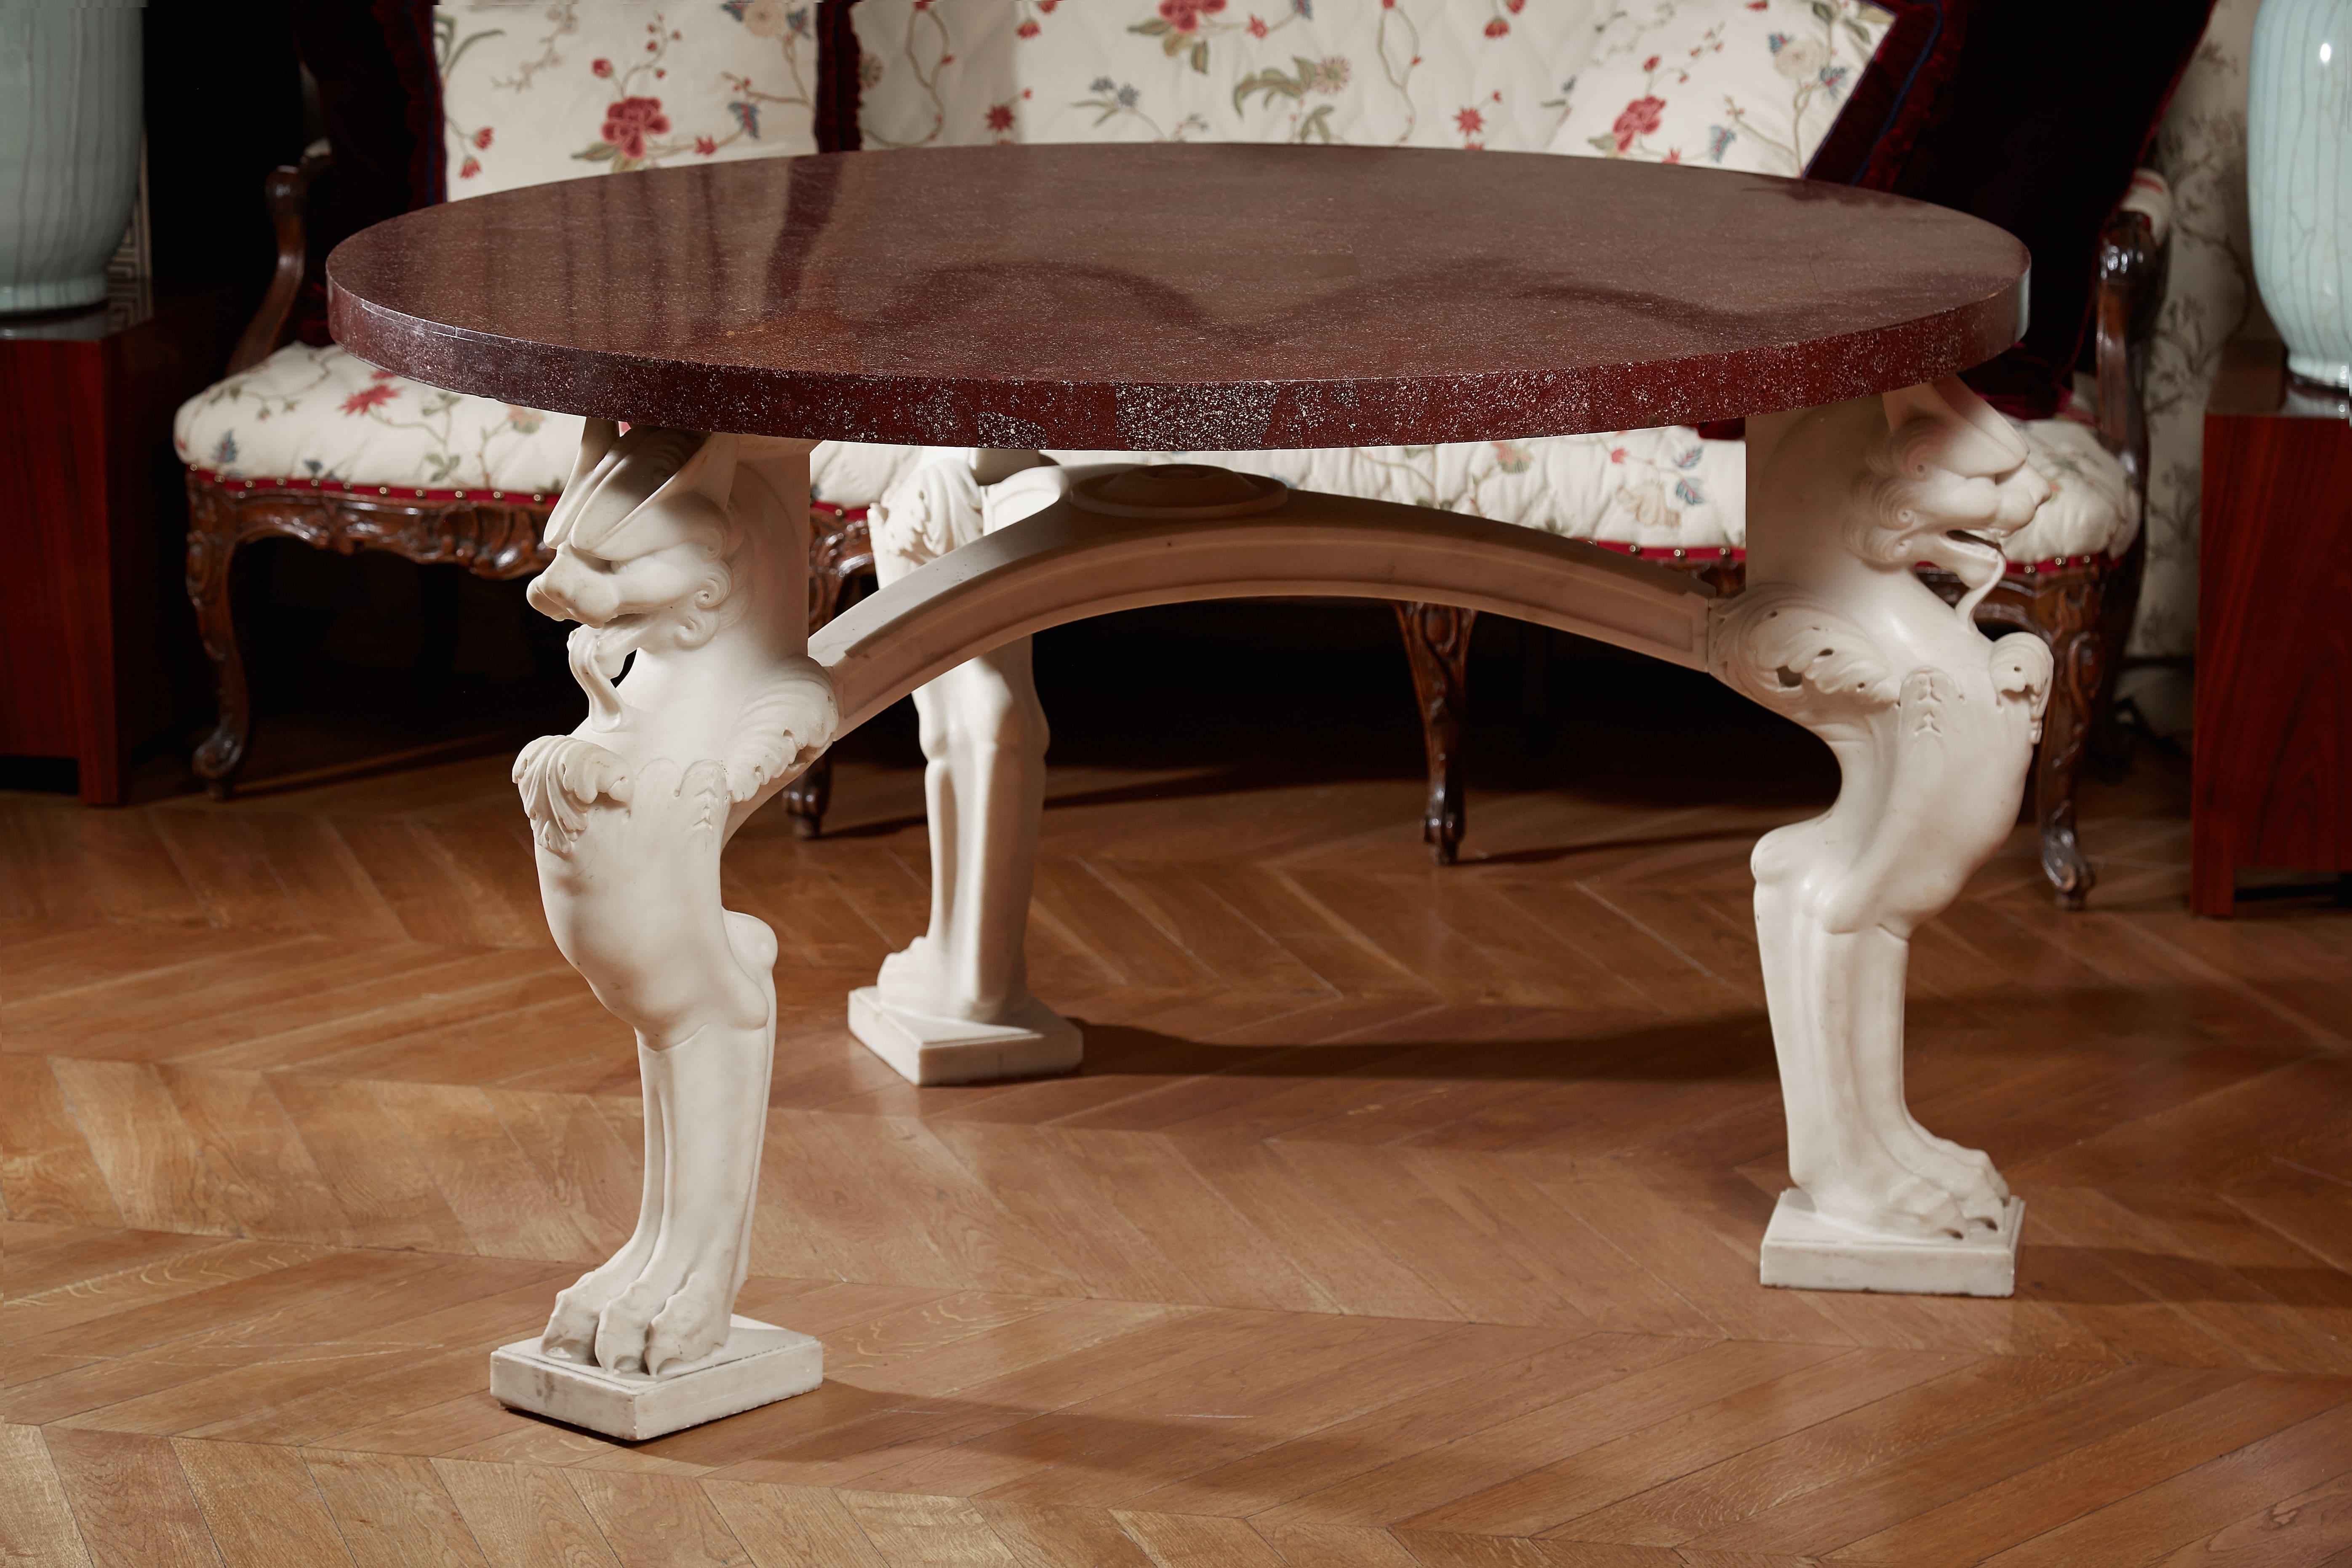 19th century round table top in Egyptian porphyry, base as a keystone support in Carrara white marble leonine legs. Dimensions: Diameter cm 130 x Height 79.